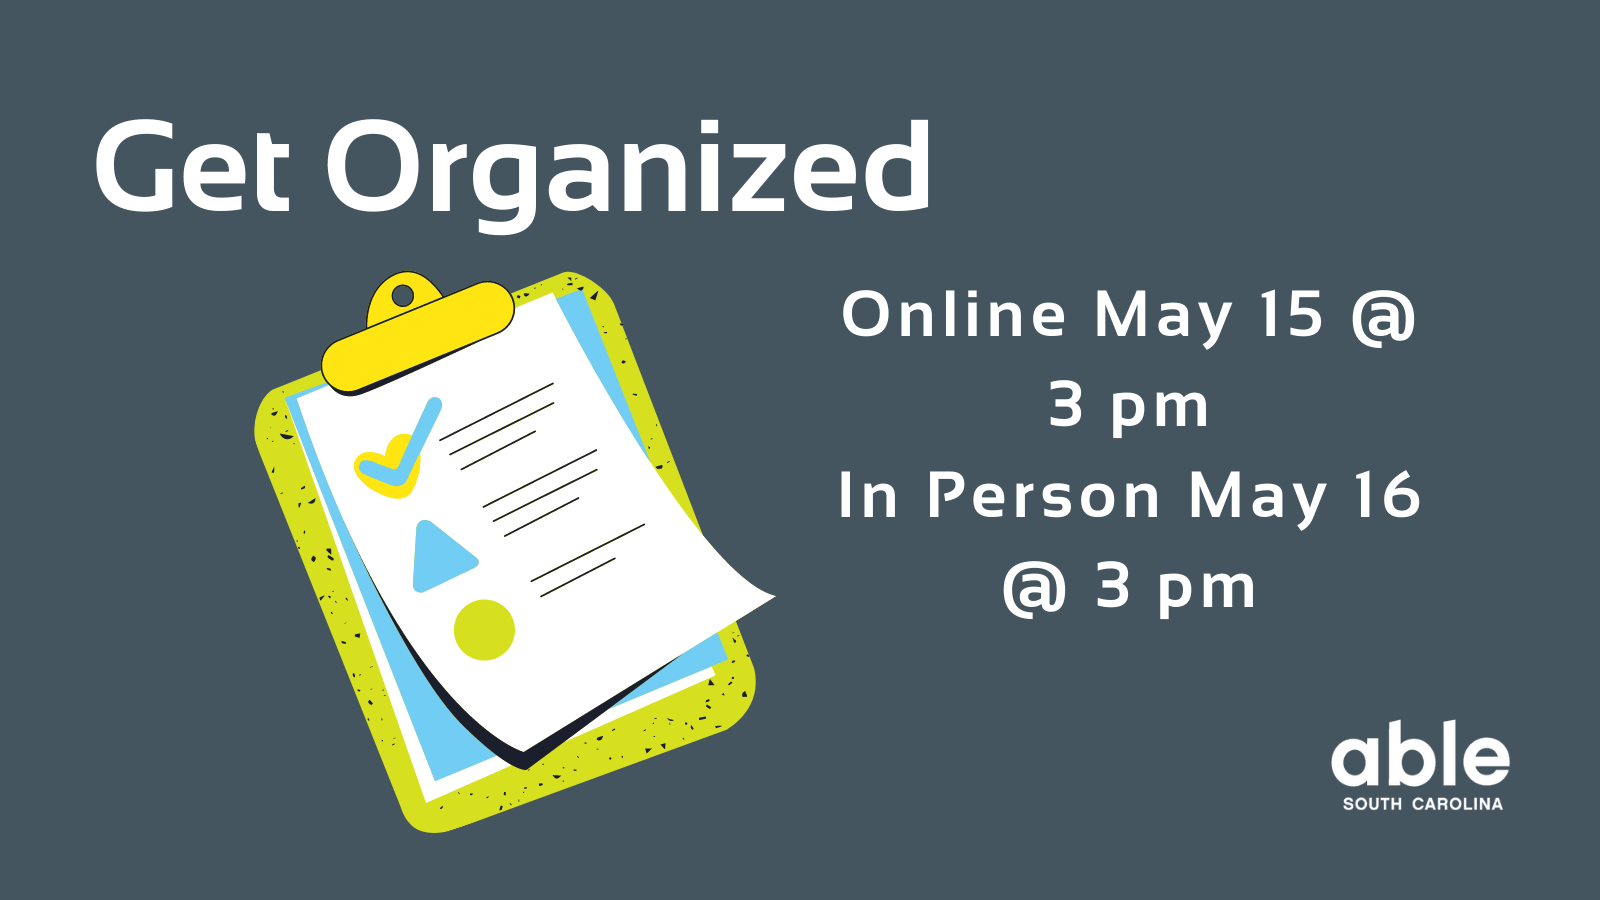 Dark gray graphic with white text reading, 'Get Organized, Online May 15 at 3 pm, In Person May 16 at 3 pm.' Illustration of checklist to the left. Able SC logo at base.